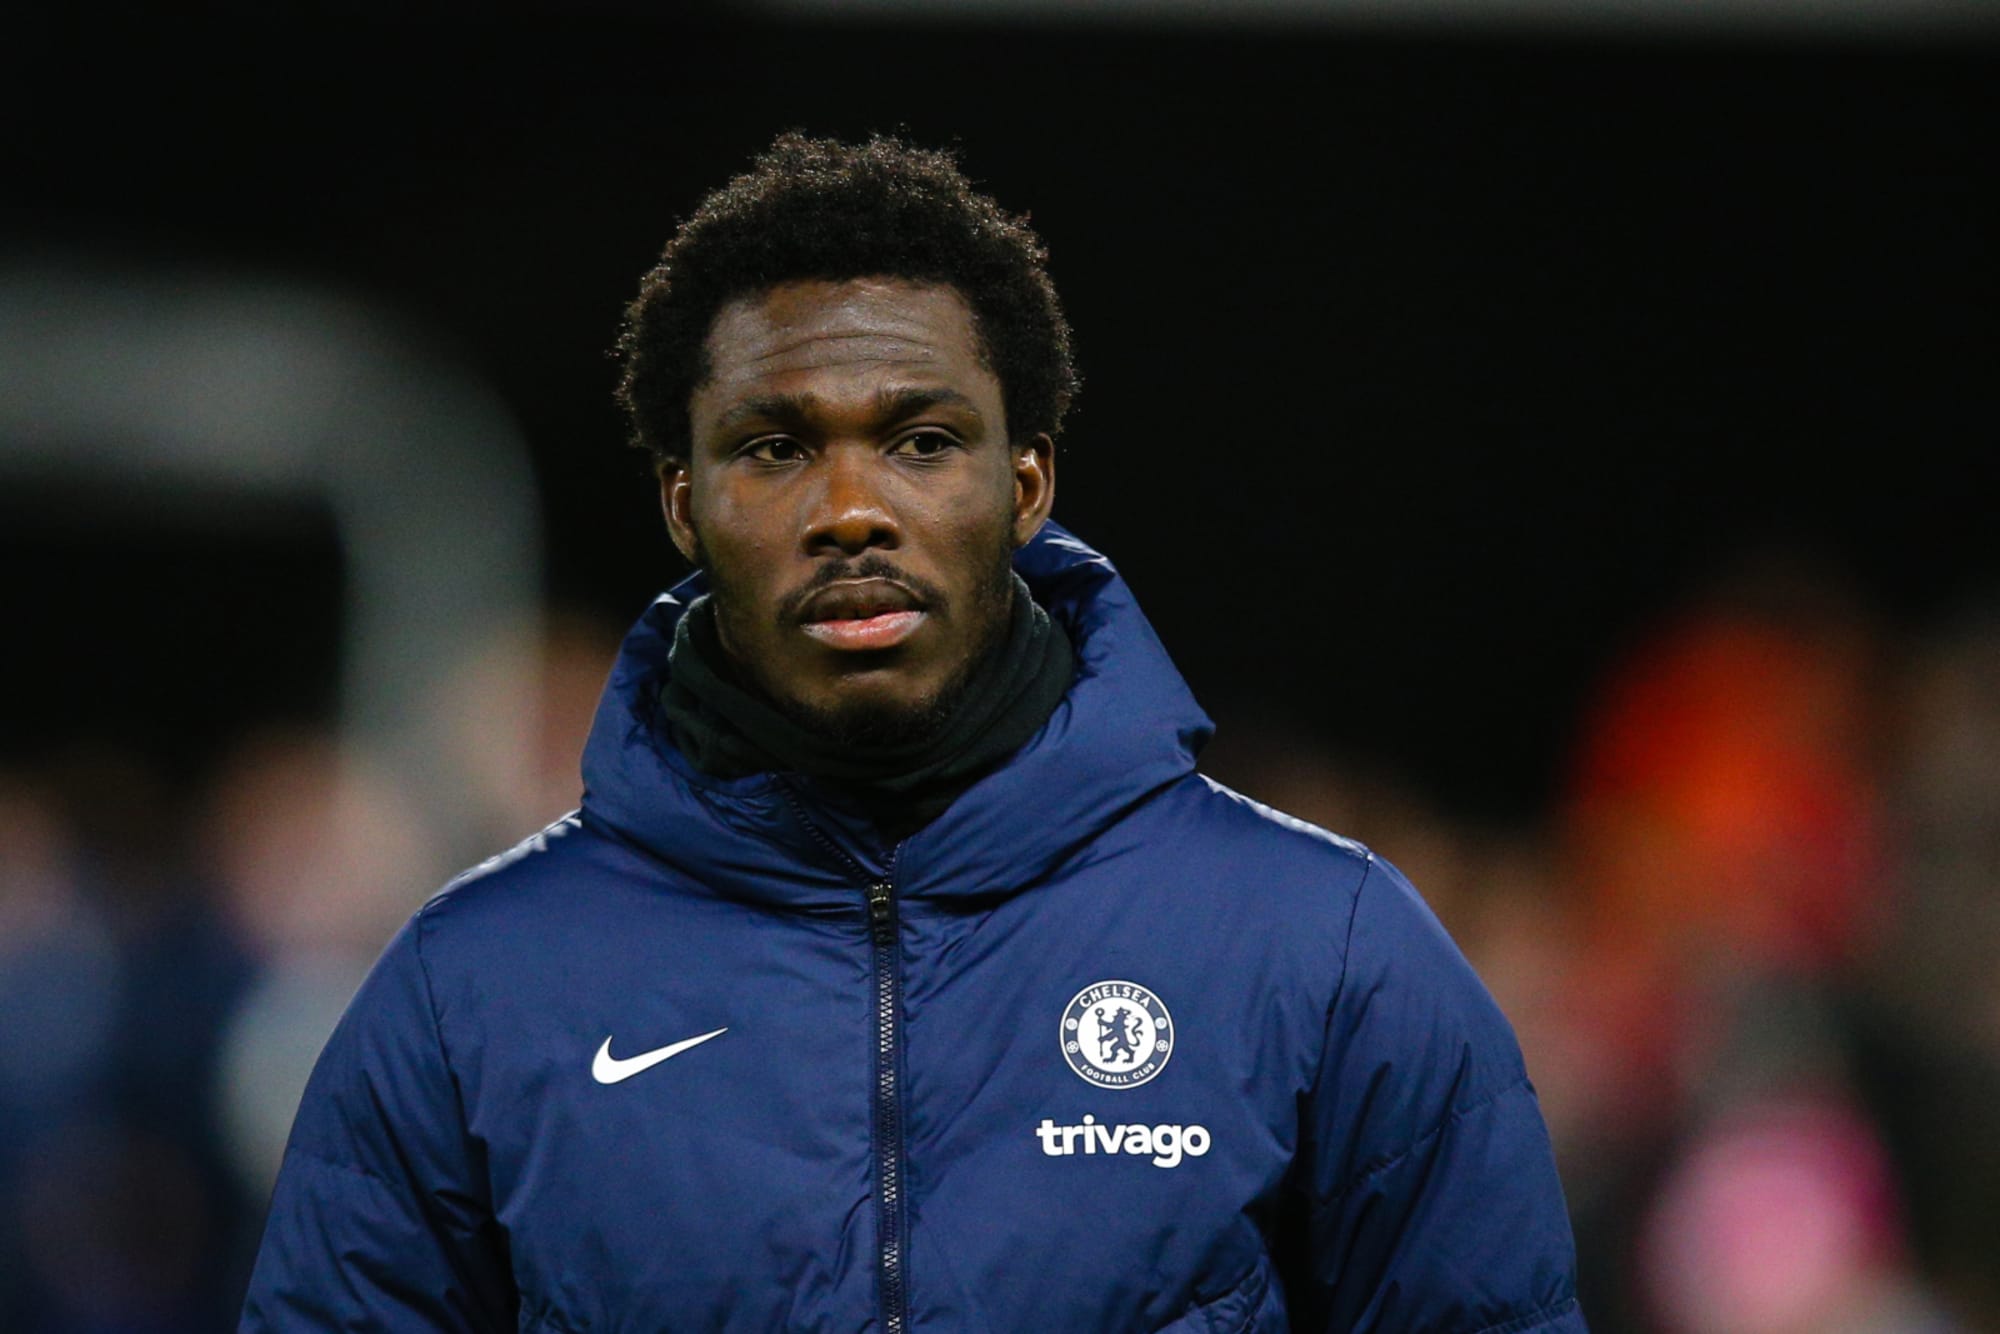 David Datro Fofana plan emerges as Chelsea continue to struggle in front of goal